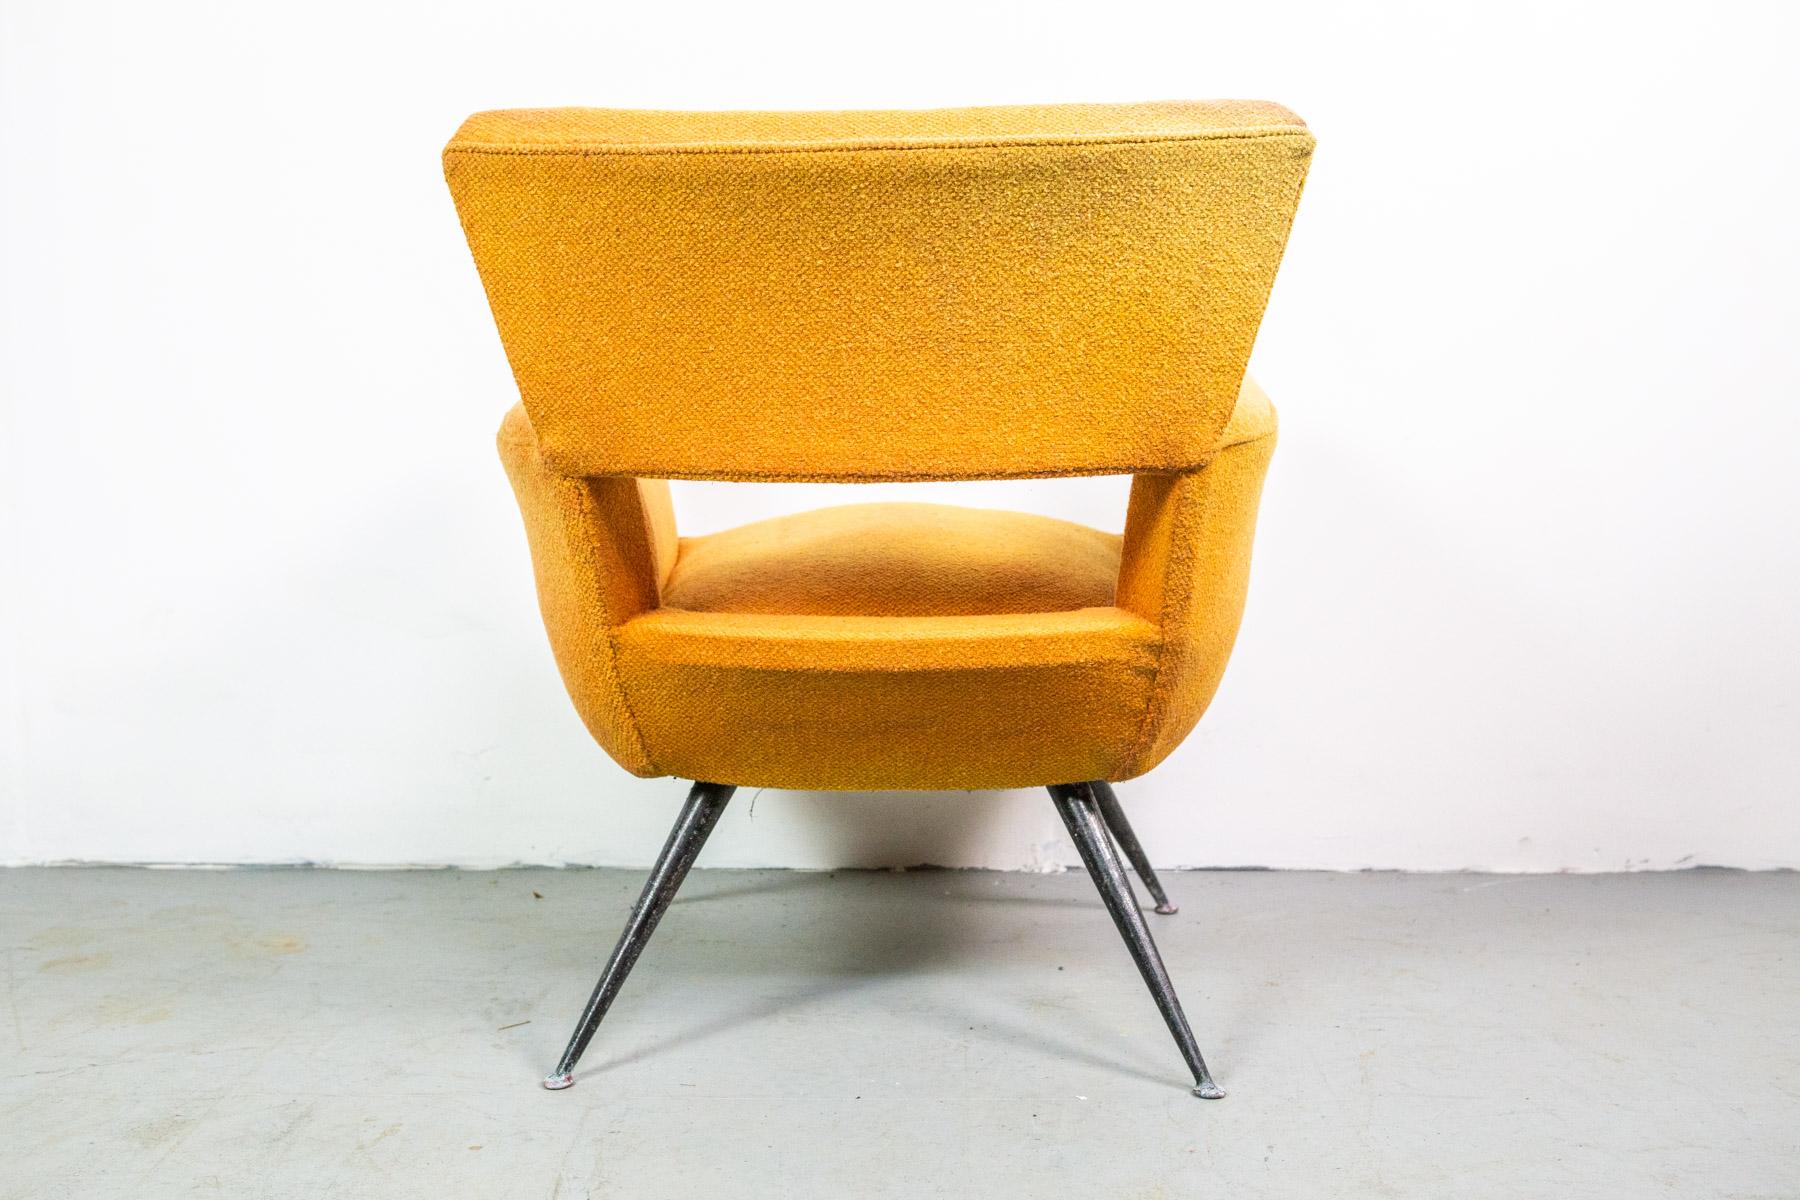 Metal 1950s Mid-Century Modern Lounge Armchair by Henry Glass